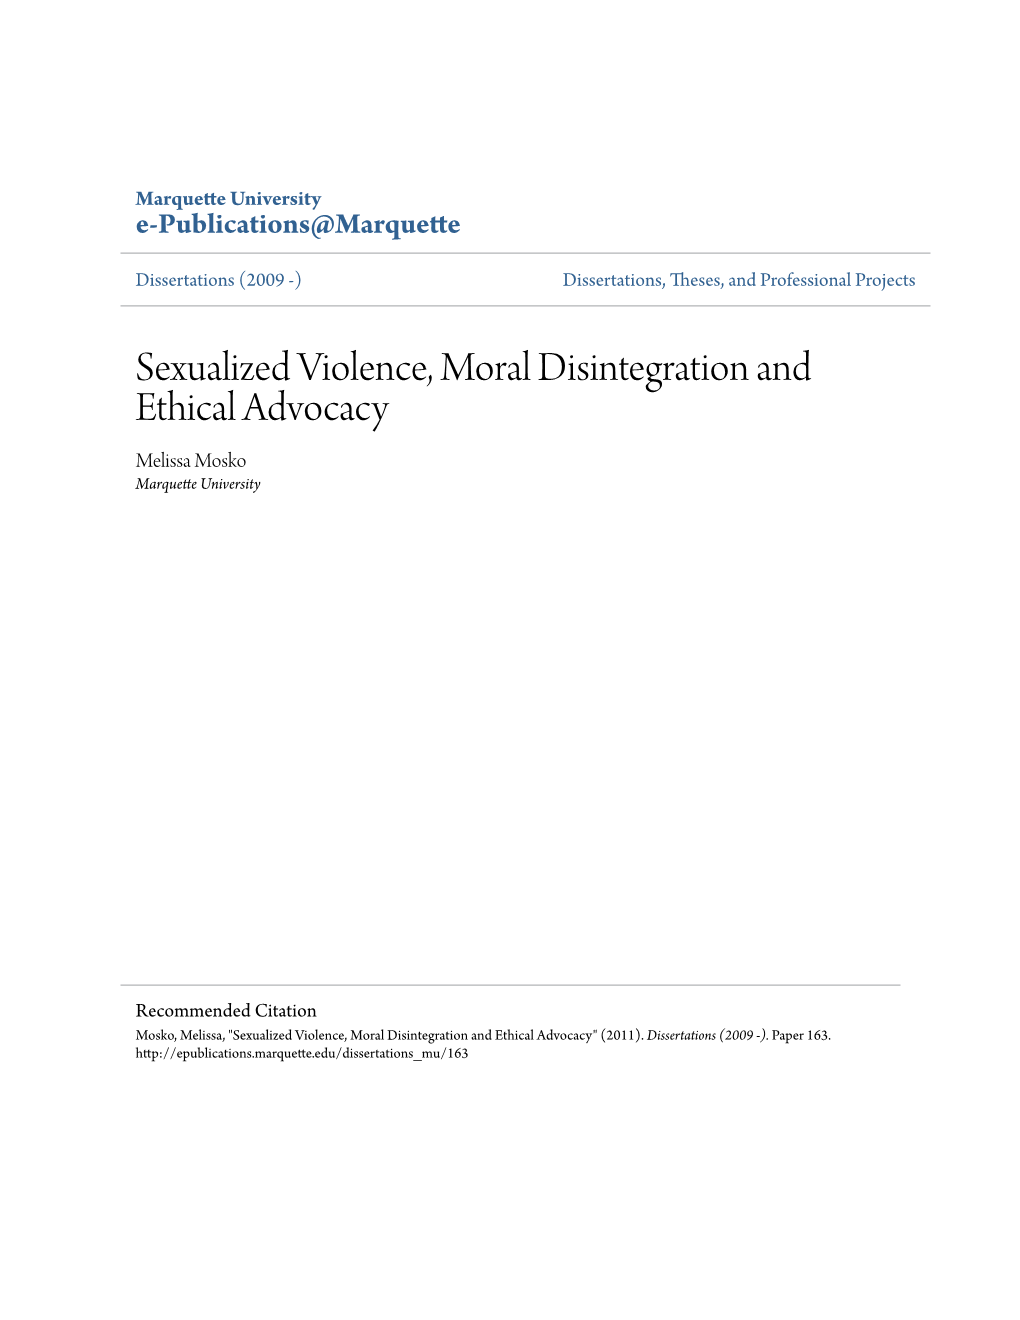 Sexualized Violence, Moral Disintegration and Ethical Advocacy Melissa Mosko Marquette University